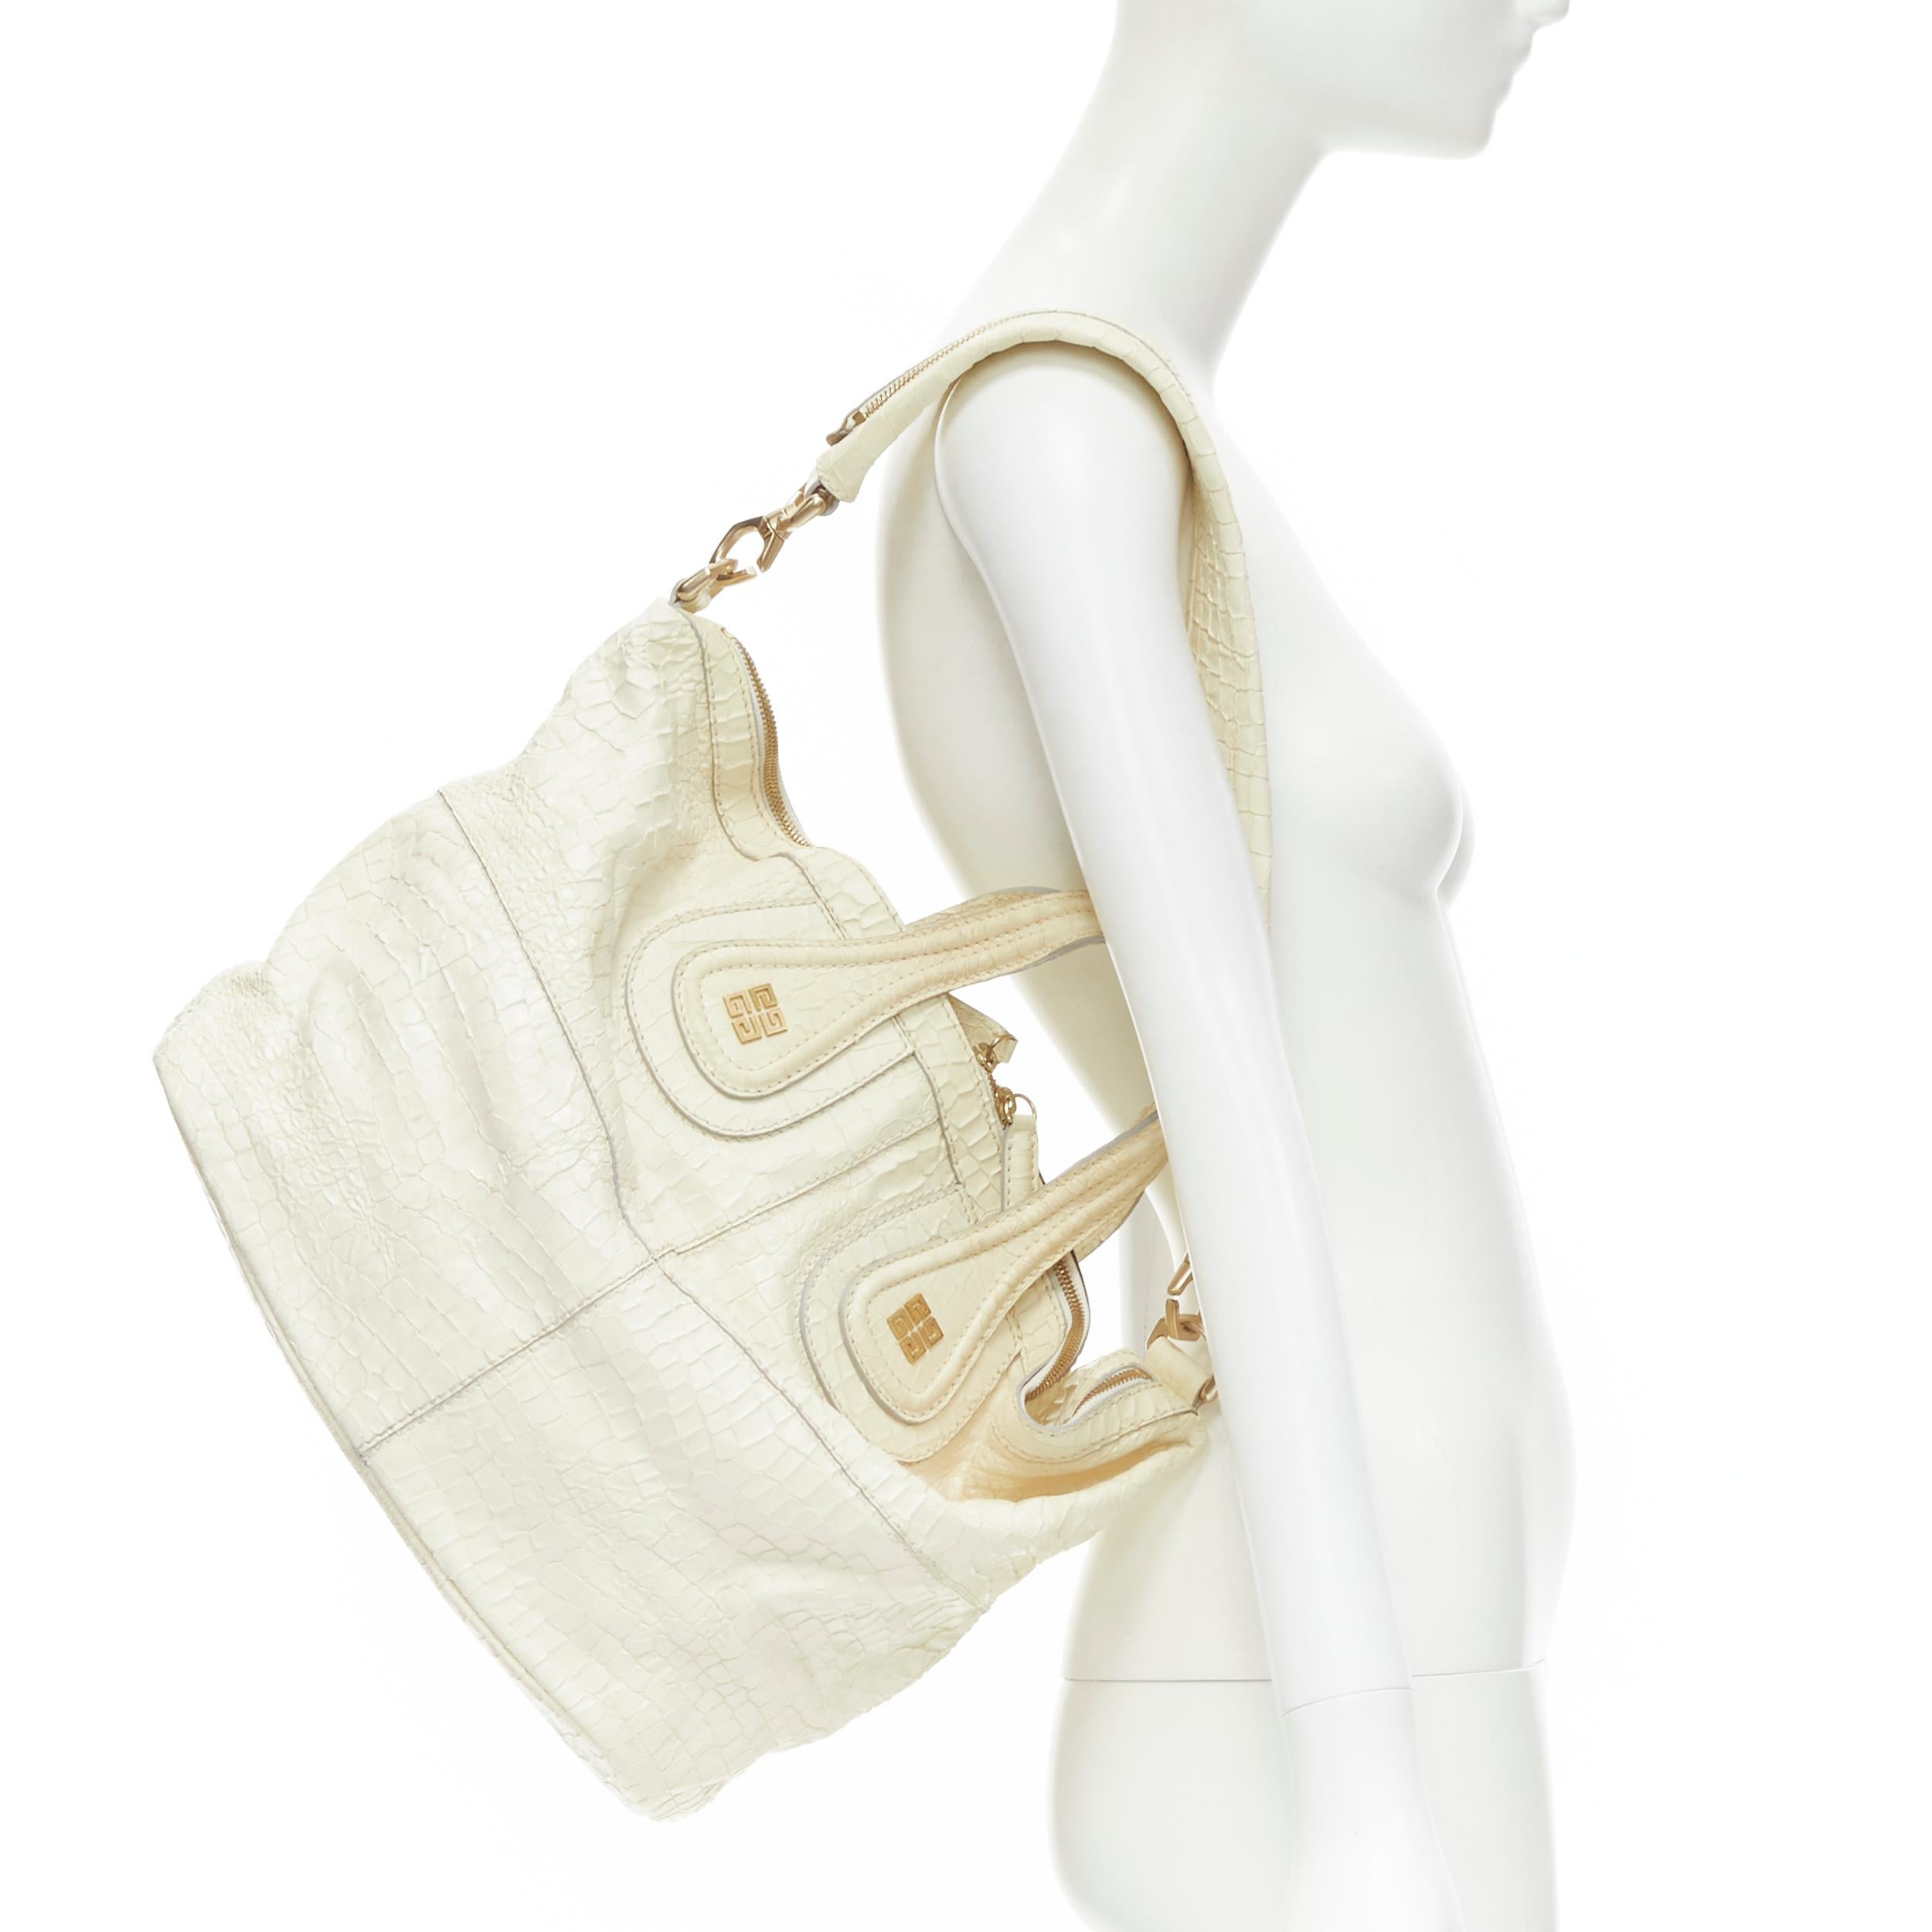 GIVENCHY Nightingale cream white embossed leather shoulder hobo tote bag 
Reference: CELG/A00145 
Brand: Givenchy 
Model: Nightingale 
Material: Leather 
Color: White 
Pattern: Solid 
Closure: Zip Extra 
Detail: Mock croc leather. Gold-tone